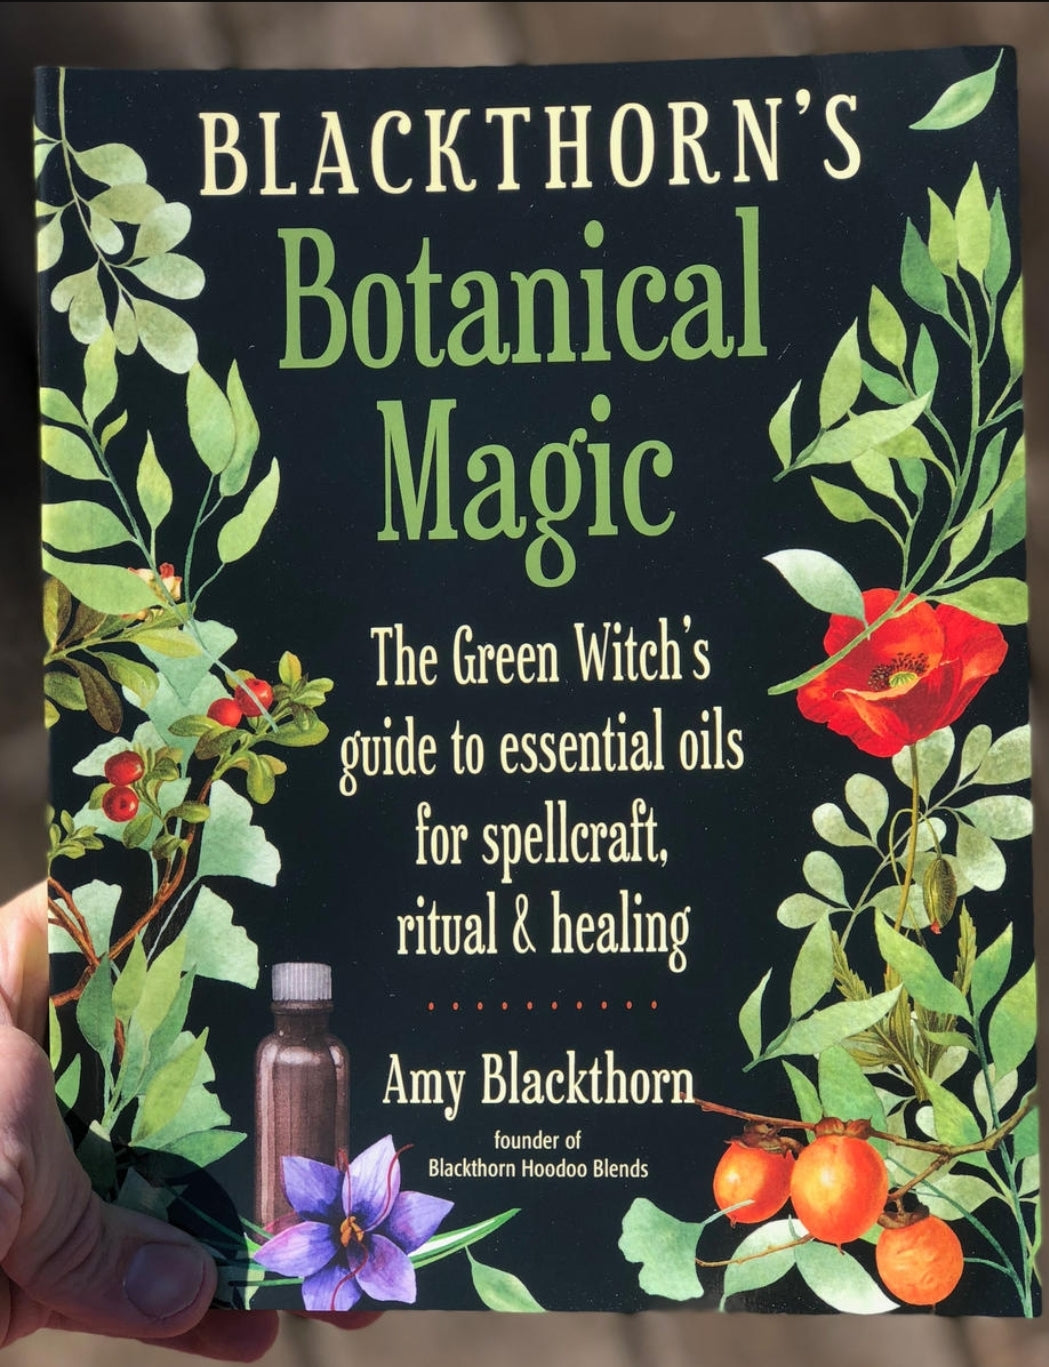 Blackthorn's Botanical Magic: The Green Witch's Guide to Essential Oils for Spellcraft, Ritual & Healing

by Amy Blackthorn AUTHOR